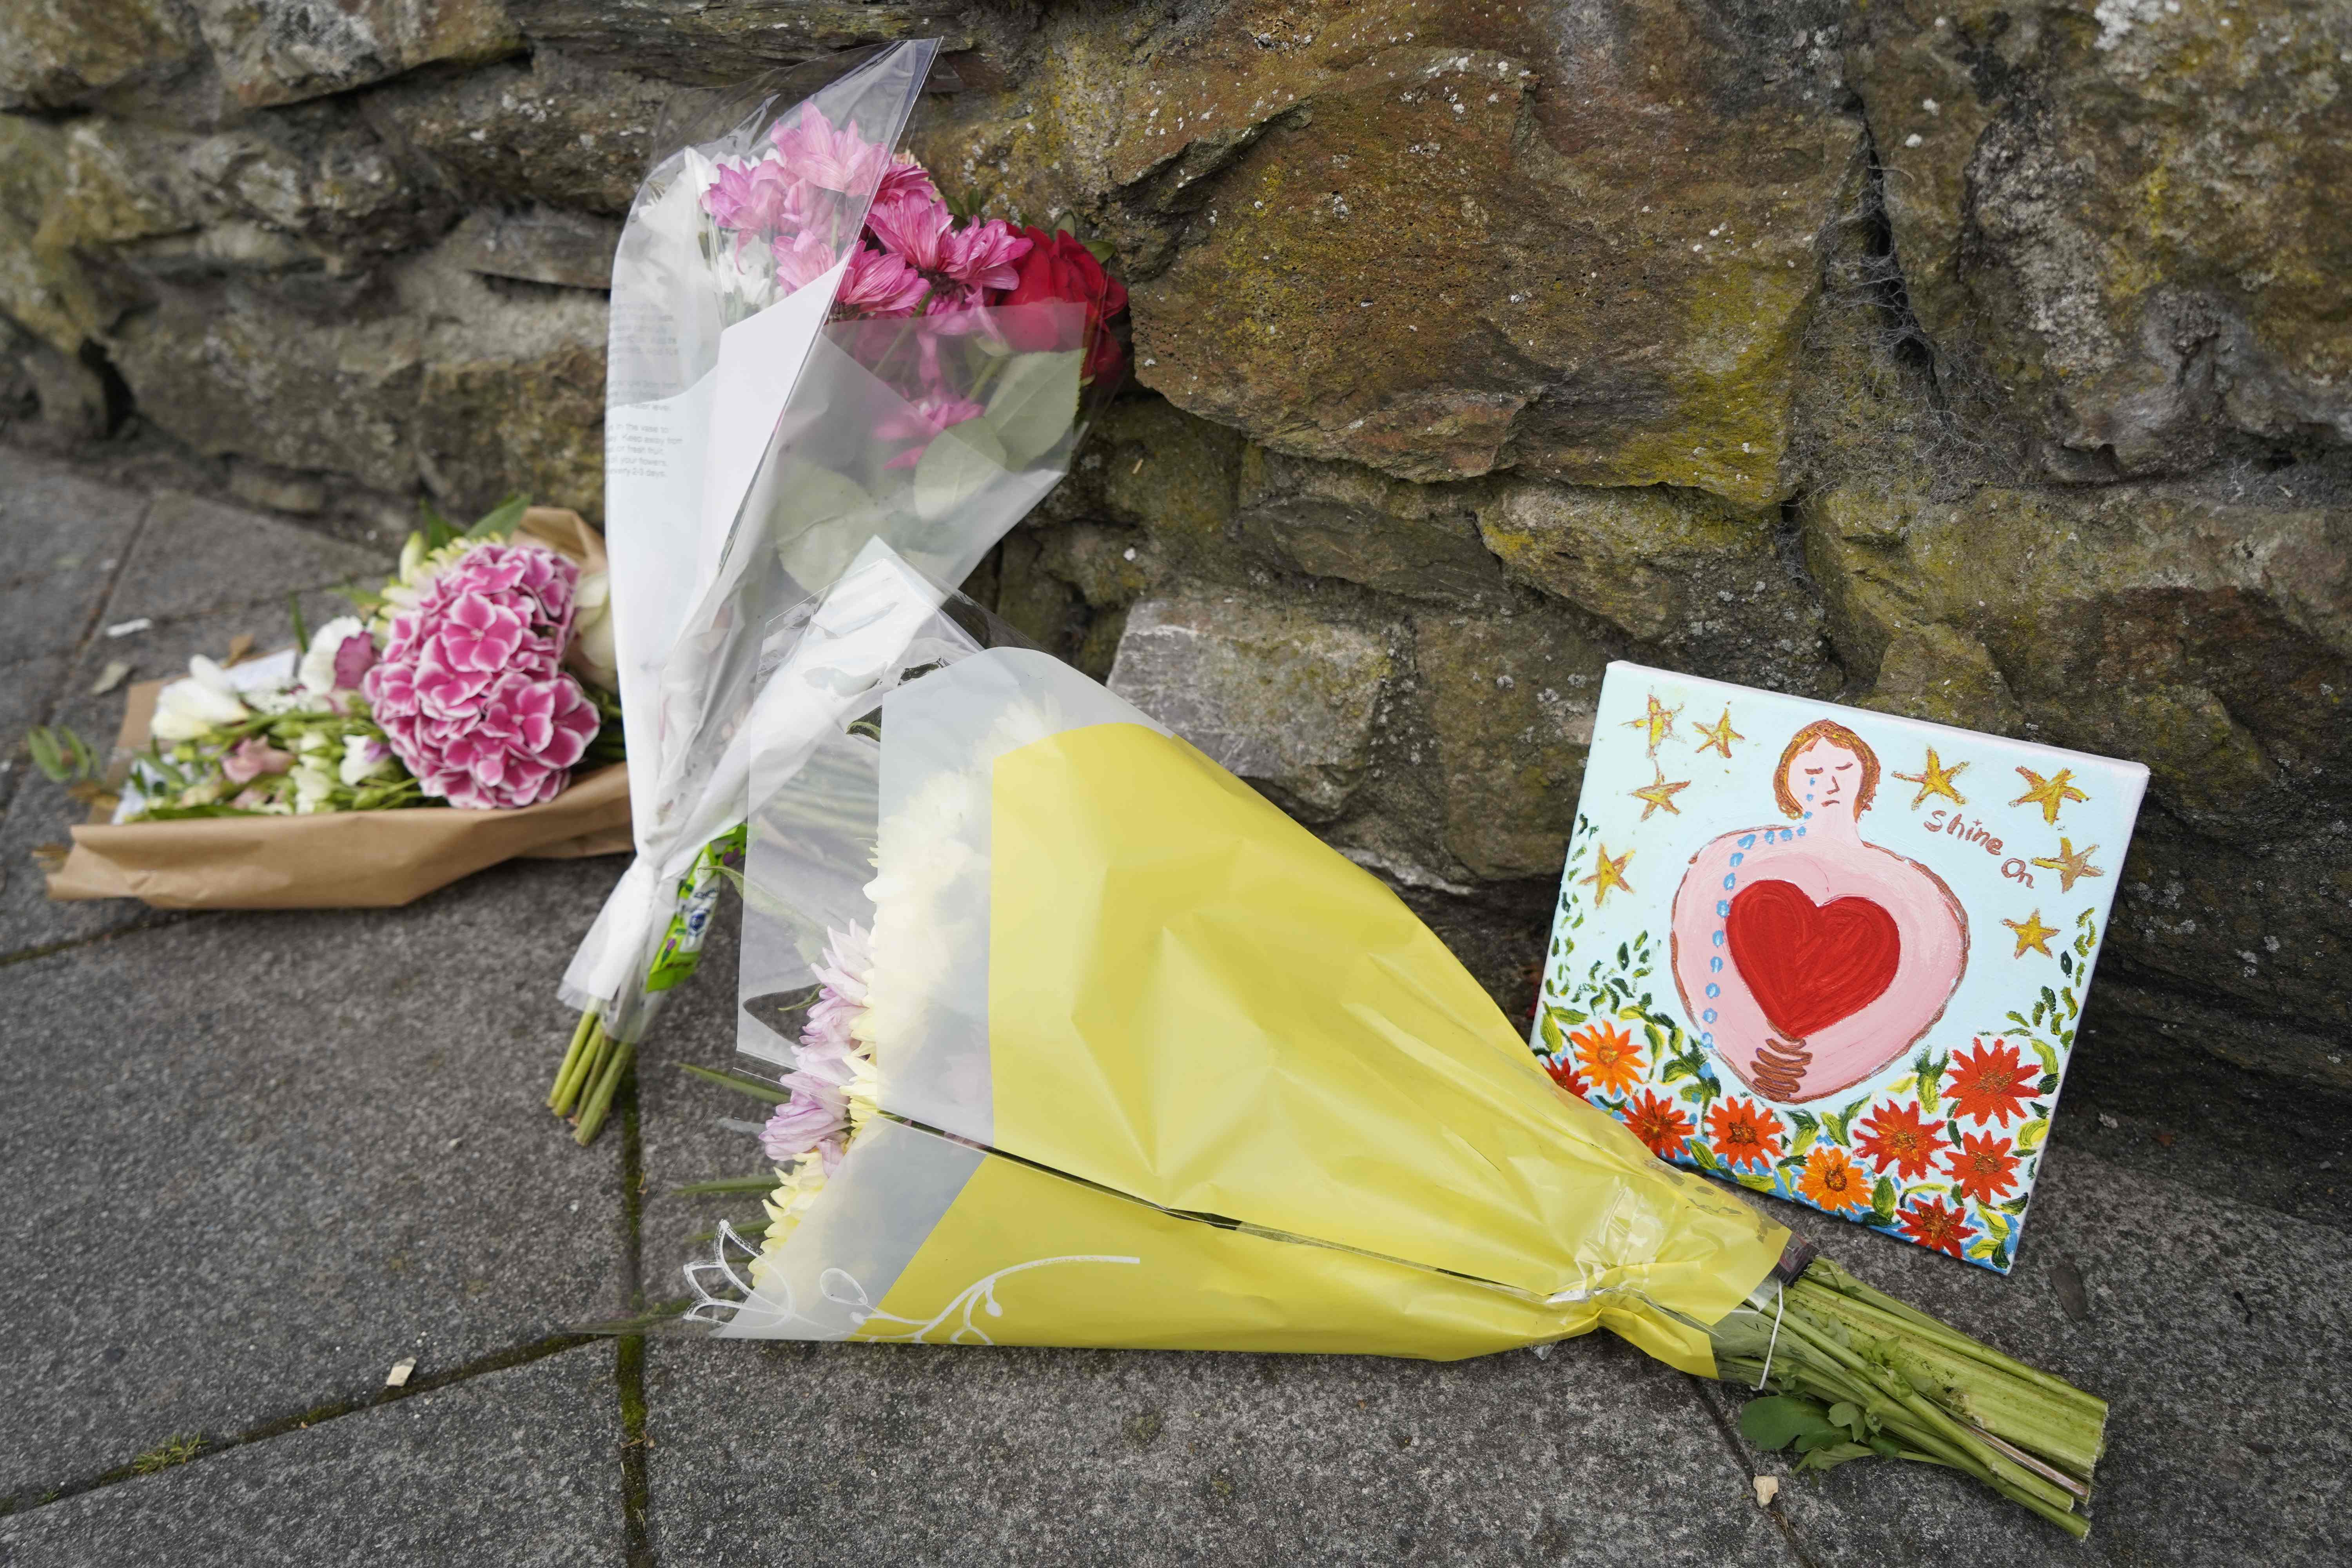 Floral tributes are placed on a pavement near the scene of the shooting